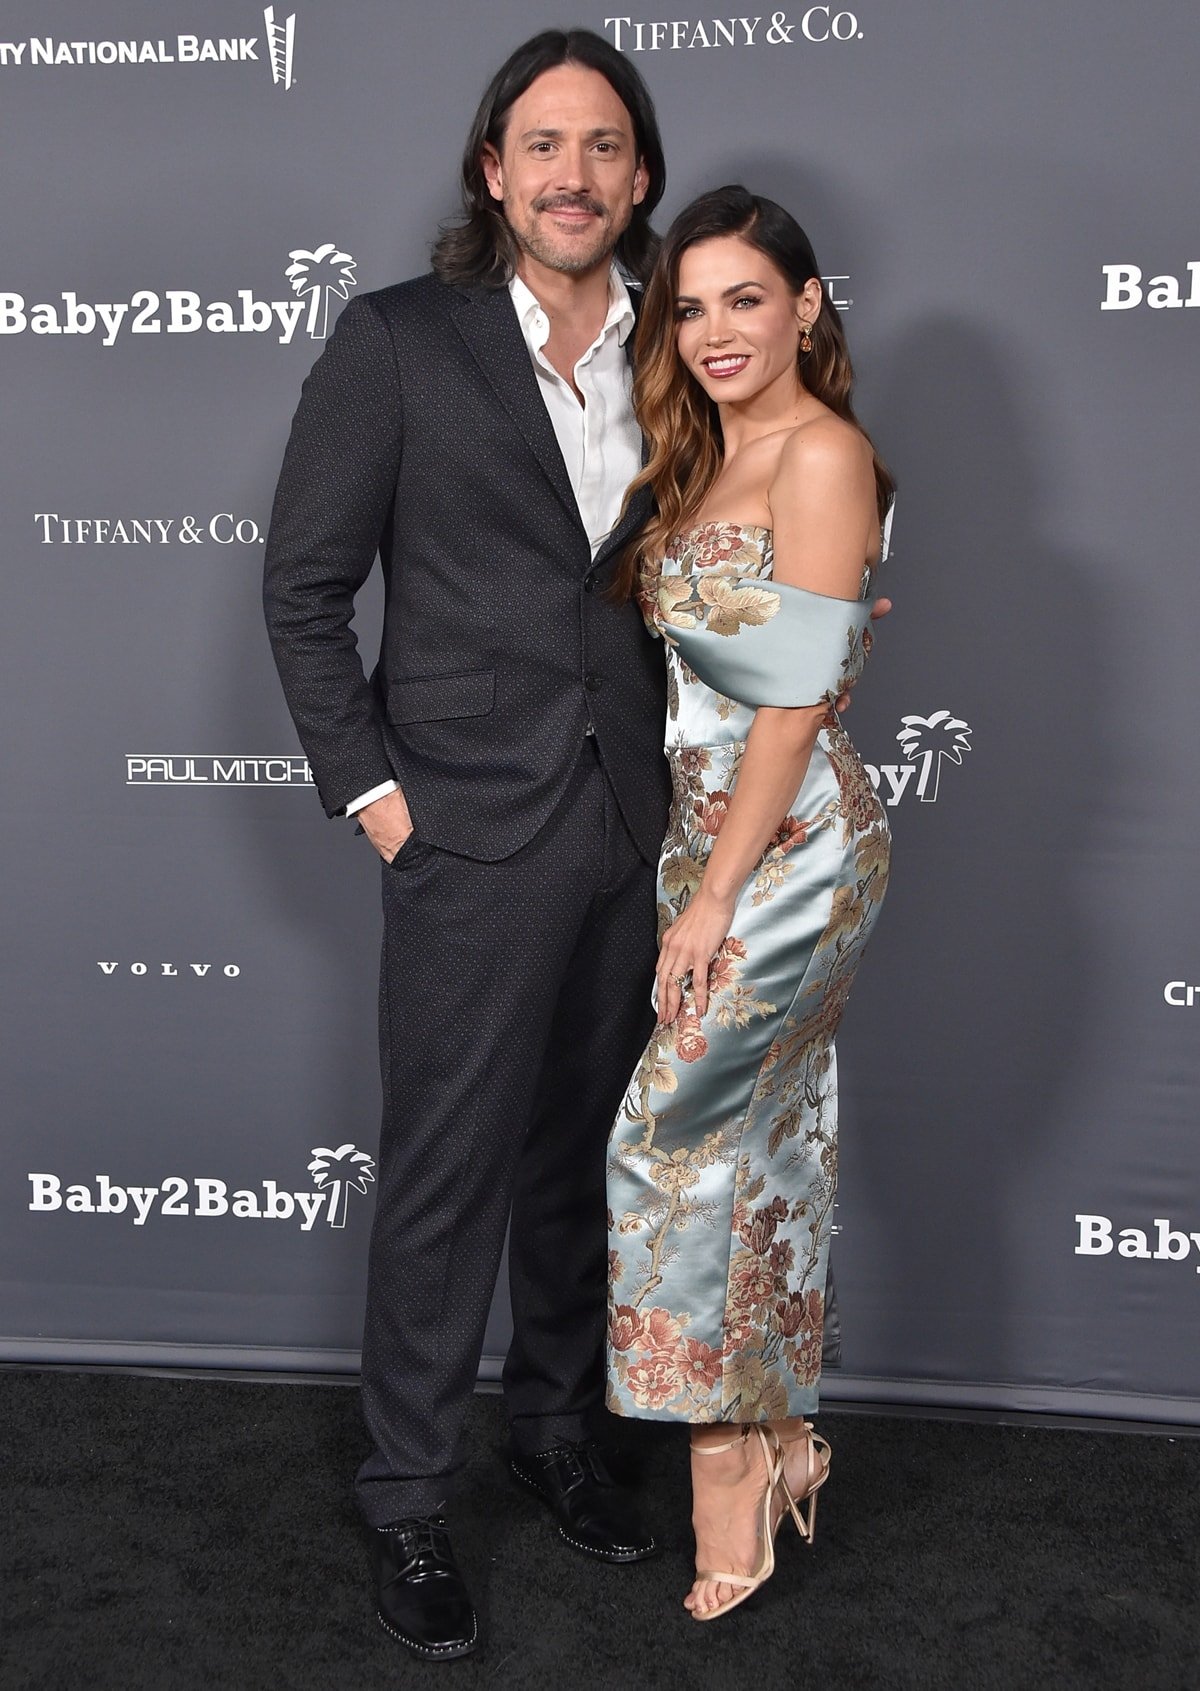 Jenna Dewan in an off-the-shoulder Rasario floral print corset dress, Candy Ice earrings, a Le Vian ring, and Jimmy Choo sandals with her boyfriend Steve Kazee at the 2021 Baby2Baby Gala Presented by Paul Mitchell